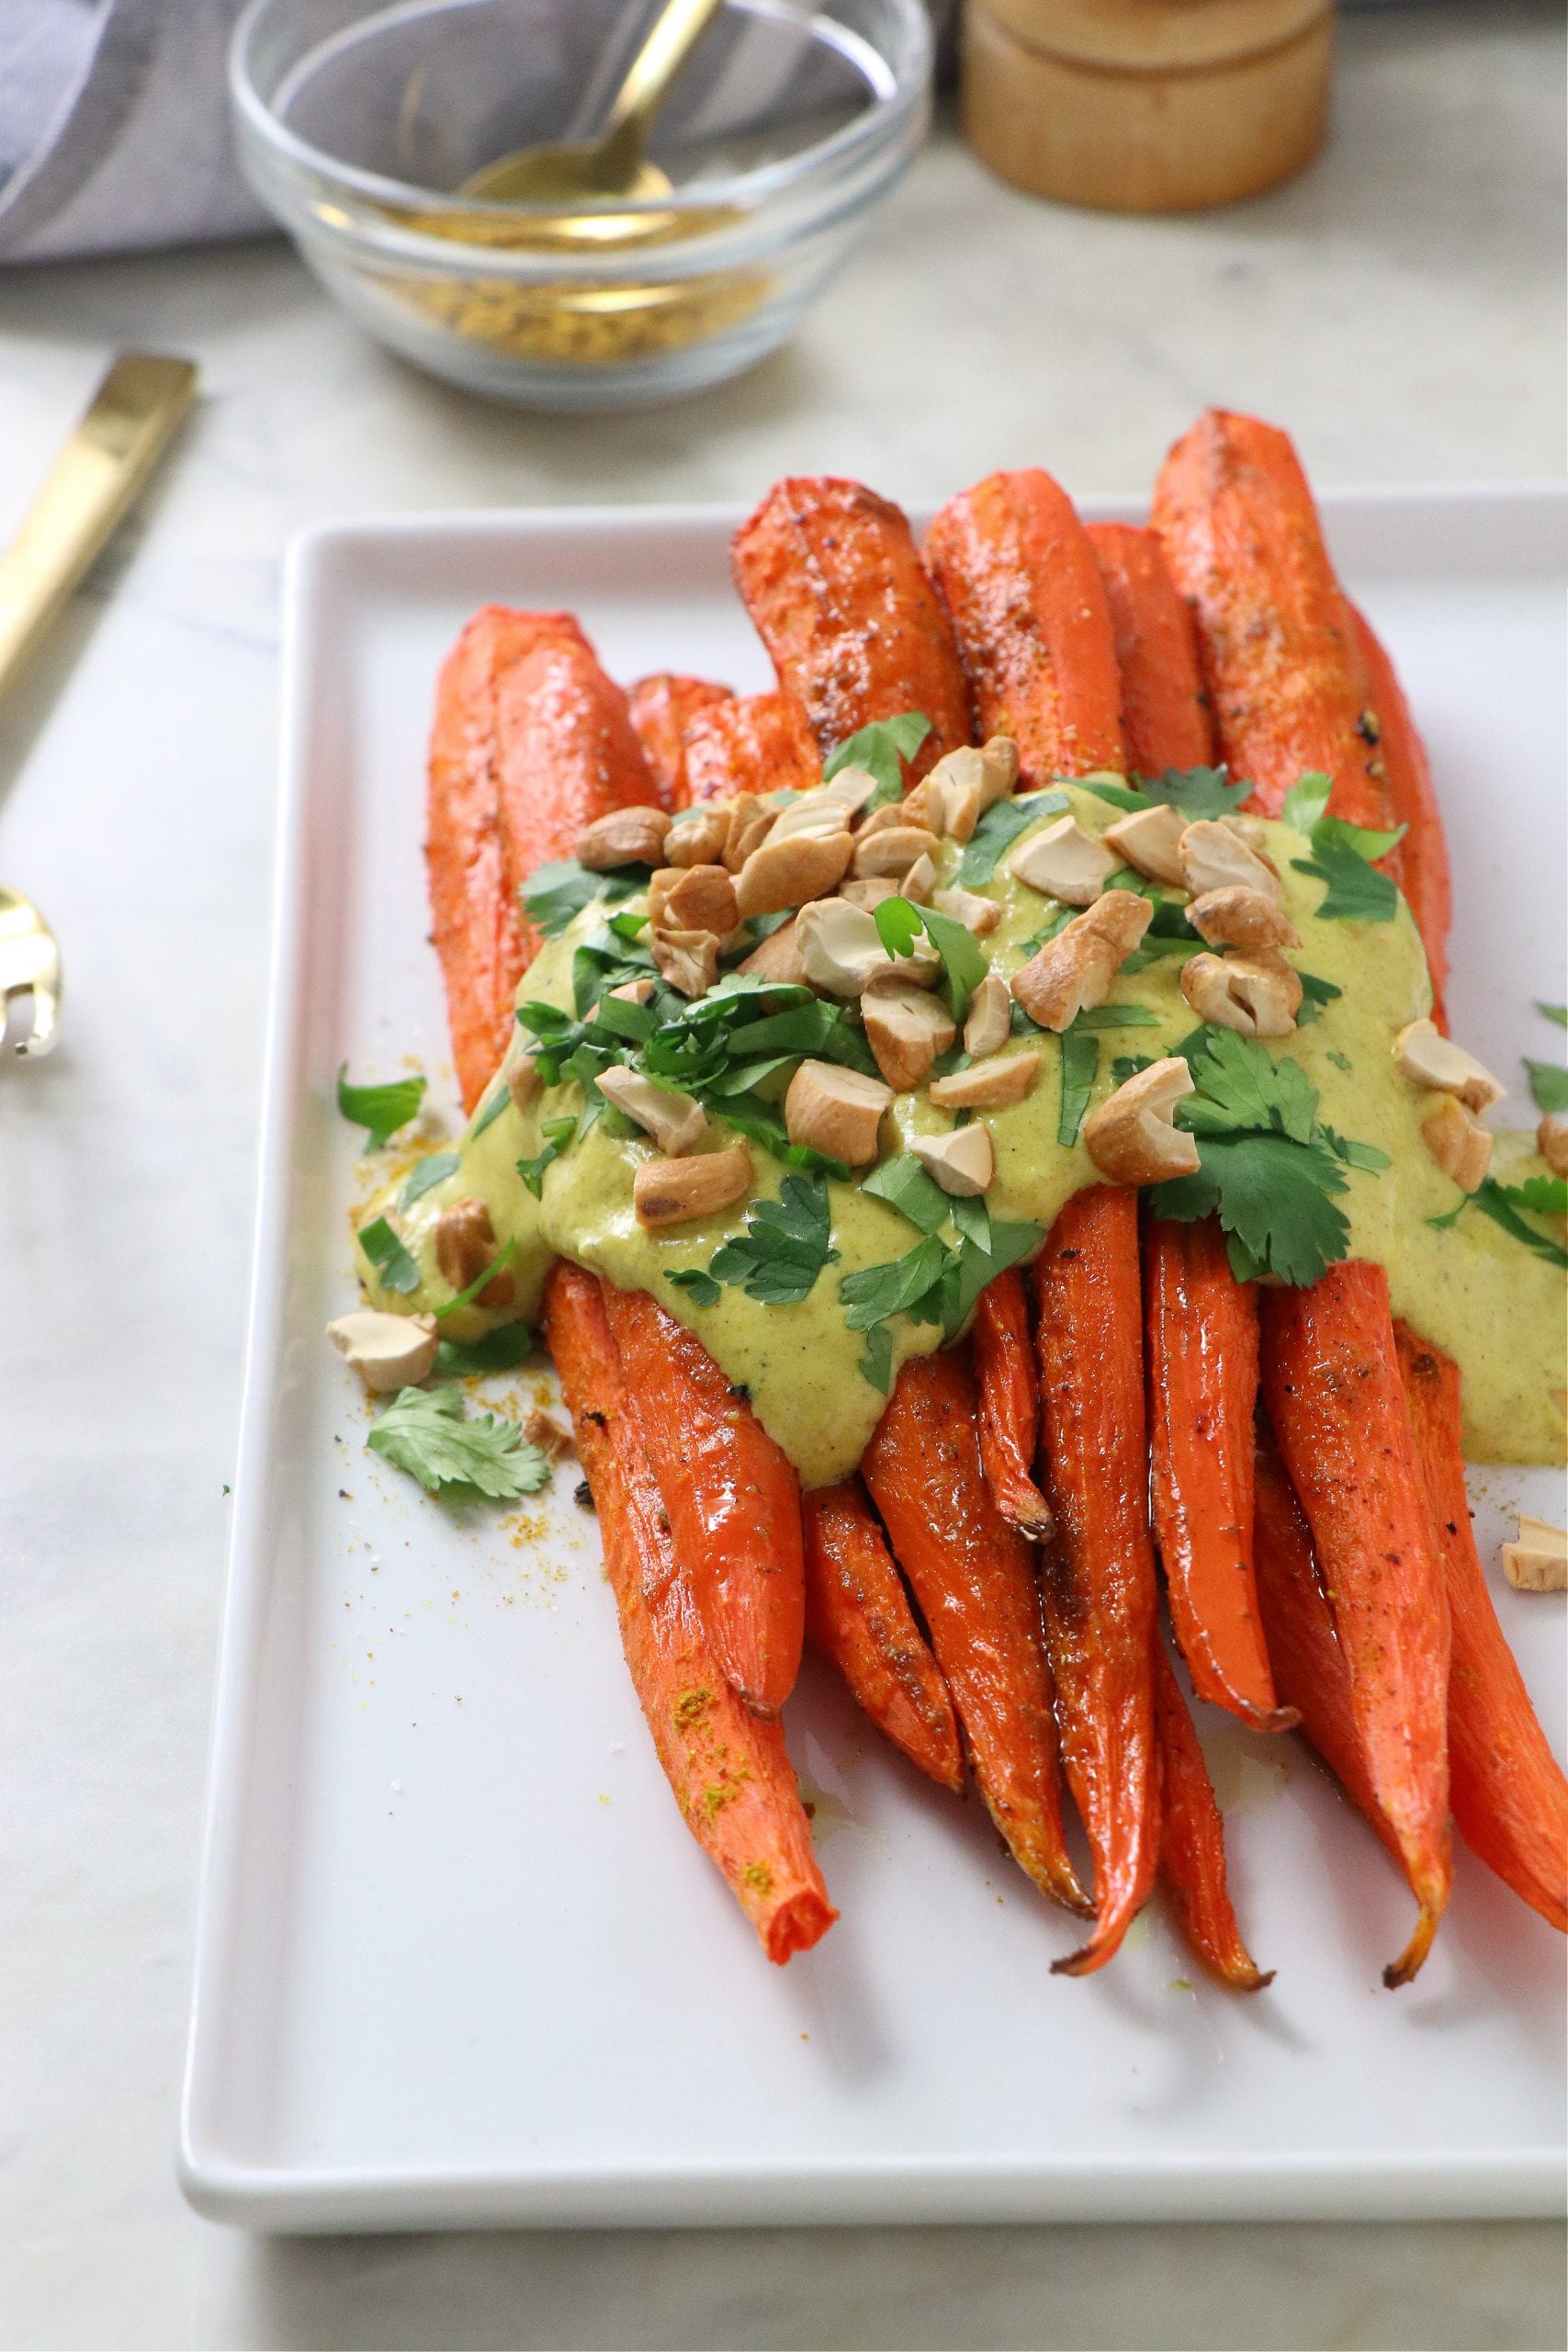 Vegan Roasted Curried Carrots